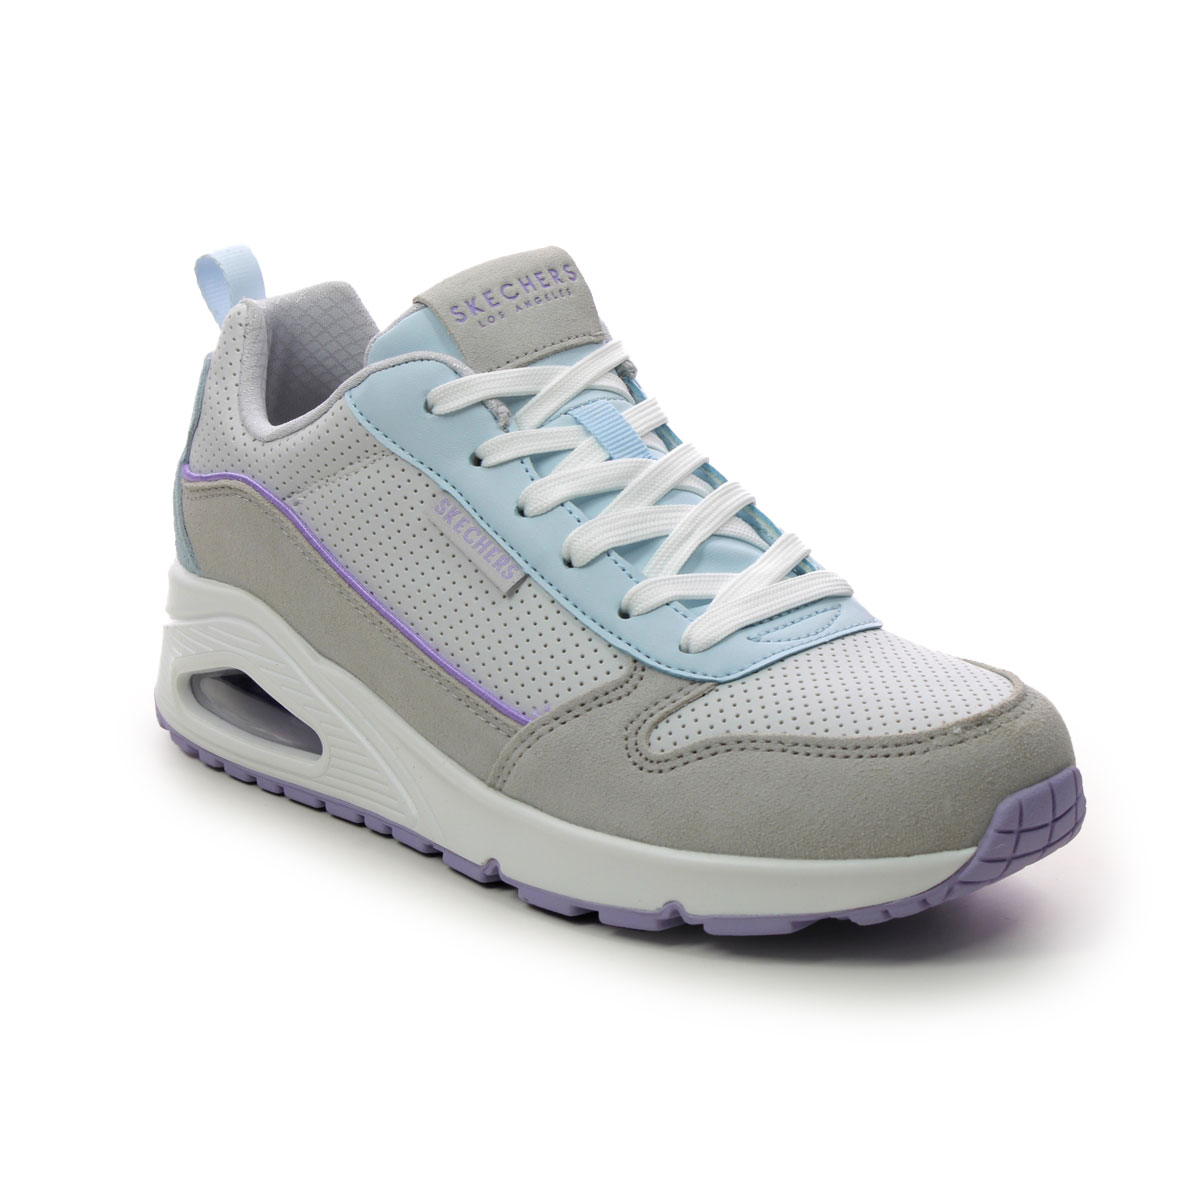 Skechers Uno Balance GYLB Grey Light Blue Womens trainers 177105 in a Plain Leather and Man-made in Size 4.5